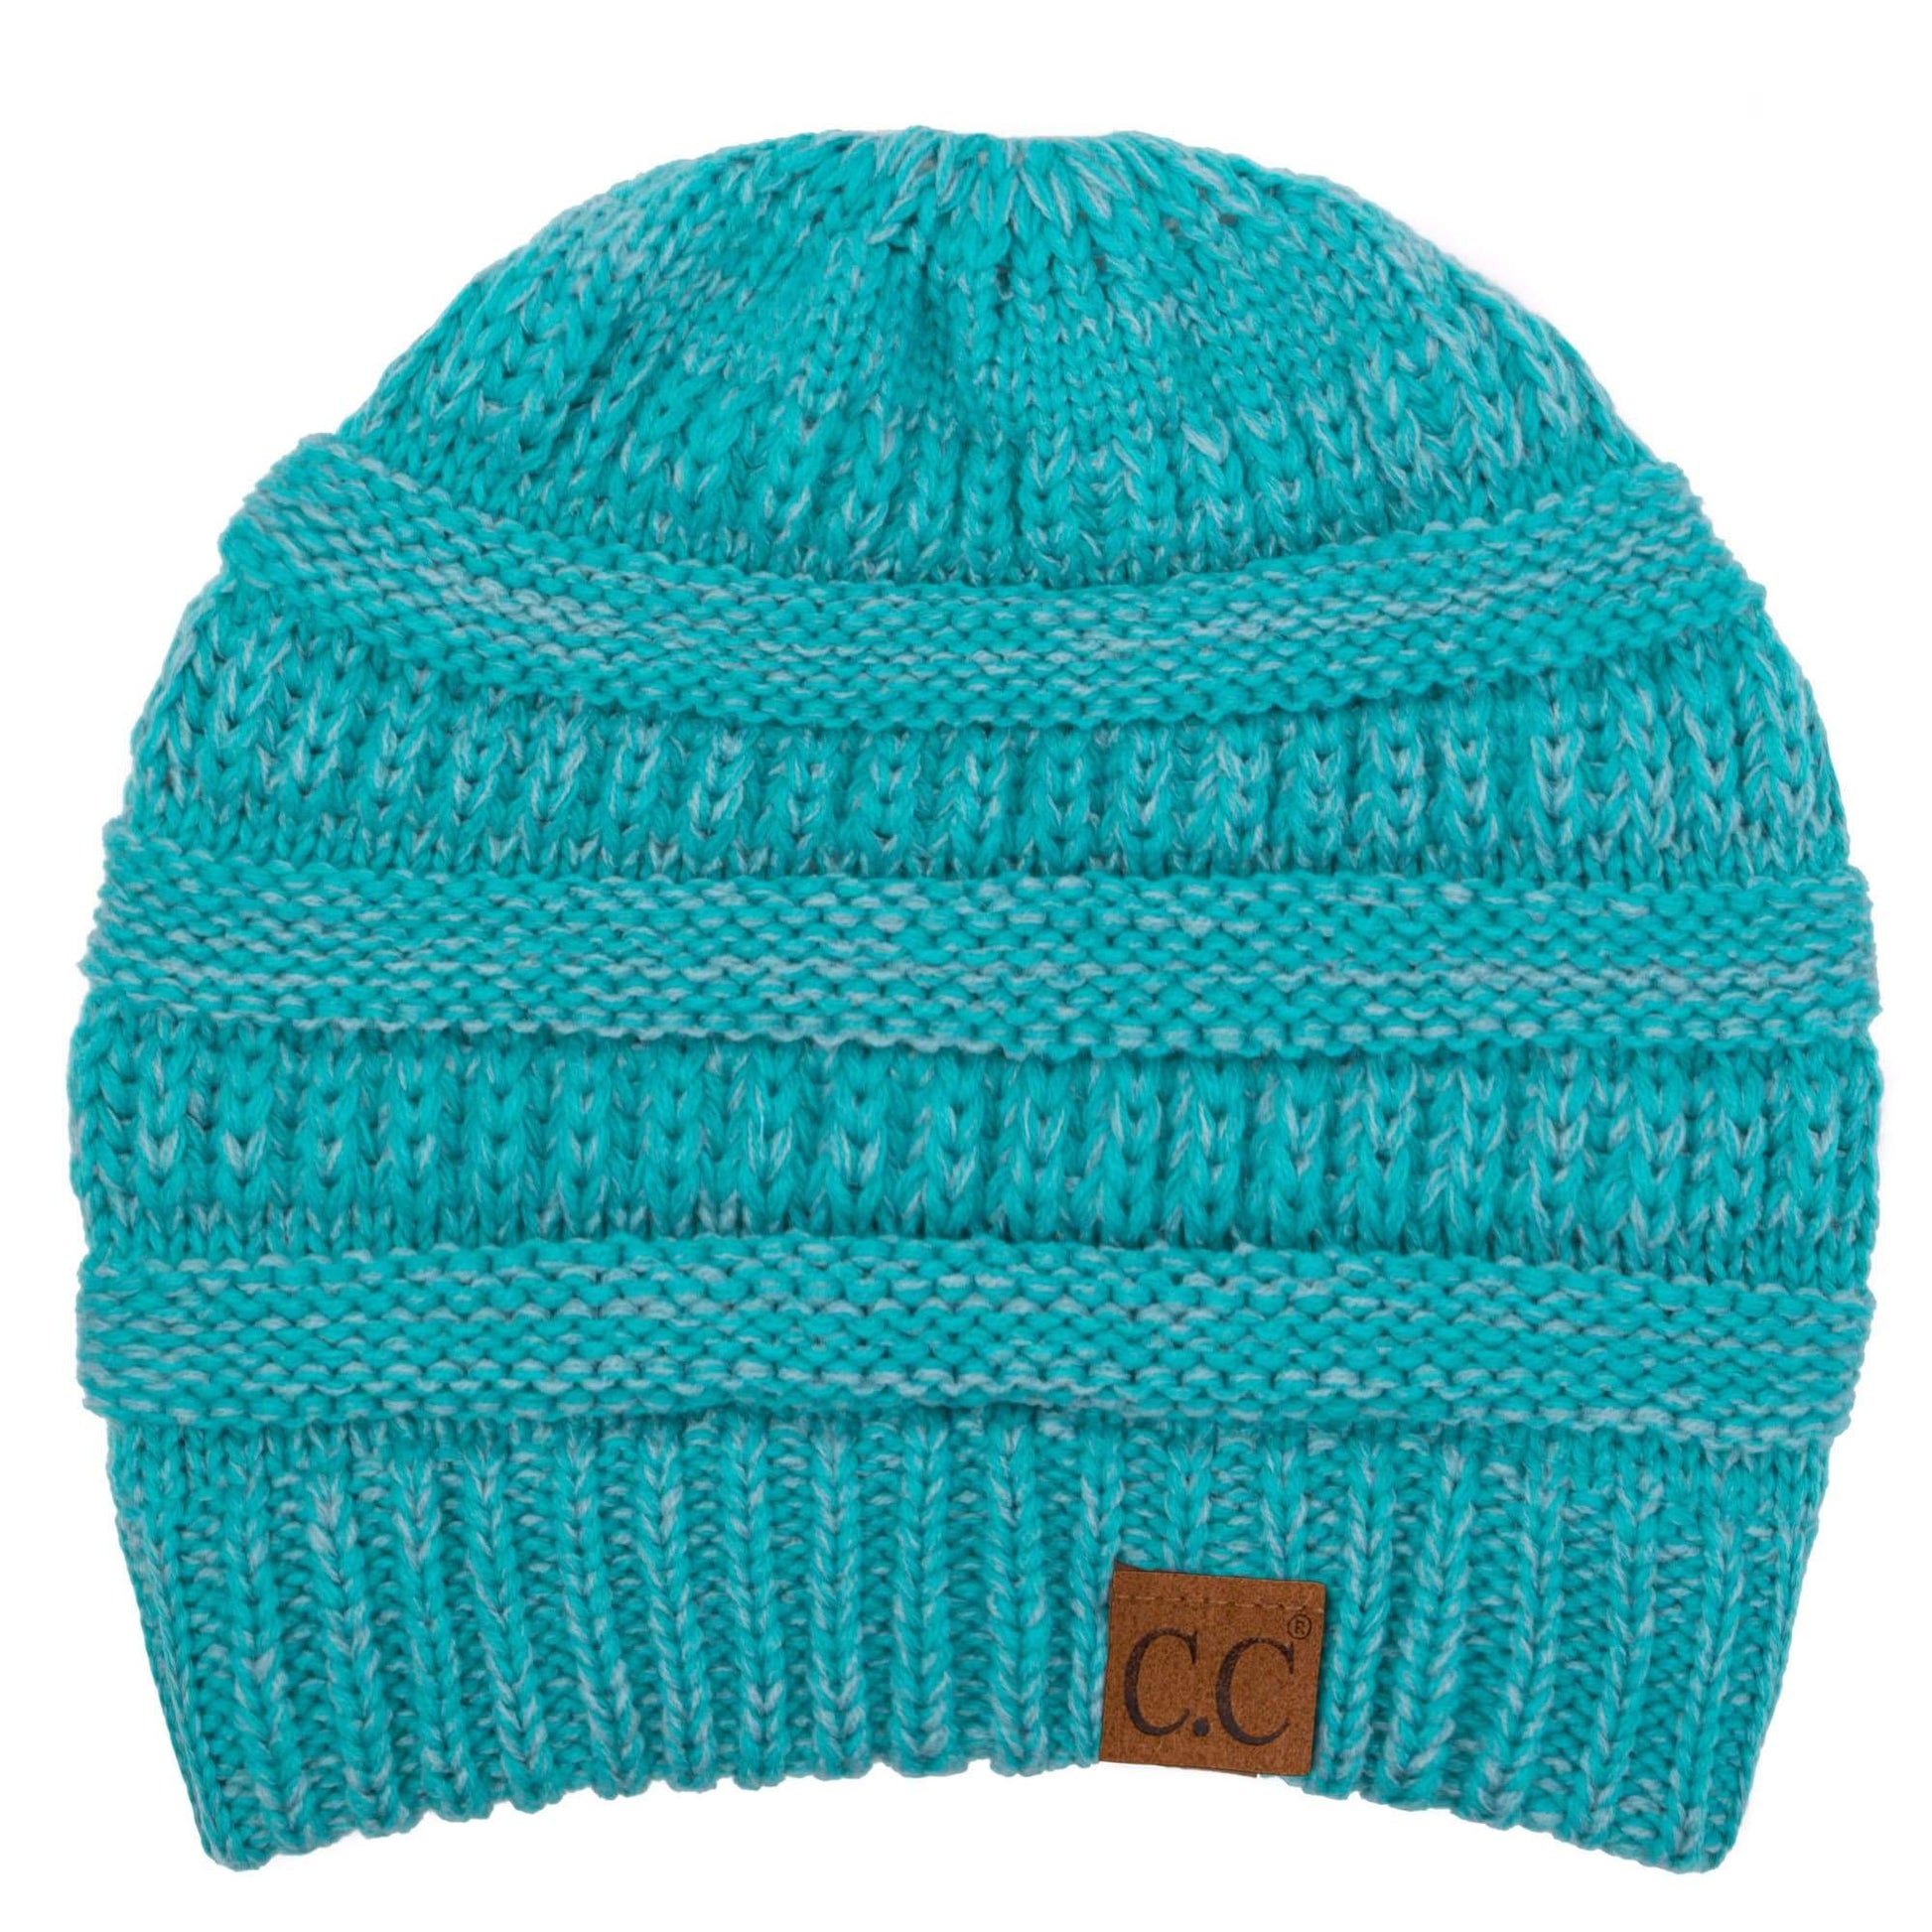 Keebon International Apparel Two Tone Sky Blue C.C Trendy Warm Chunky Soft Stretch Two-Toned Cable Knit Beanie Skully